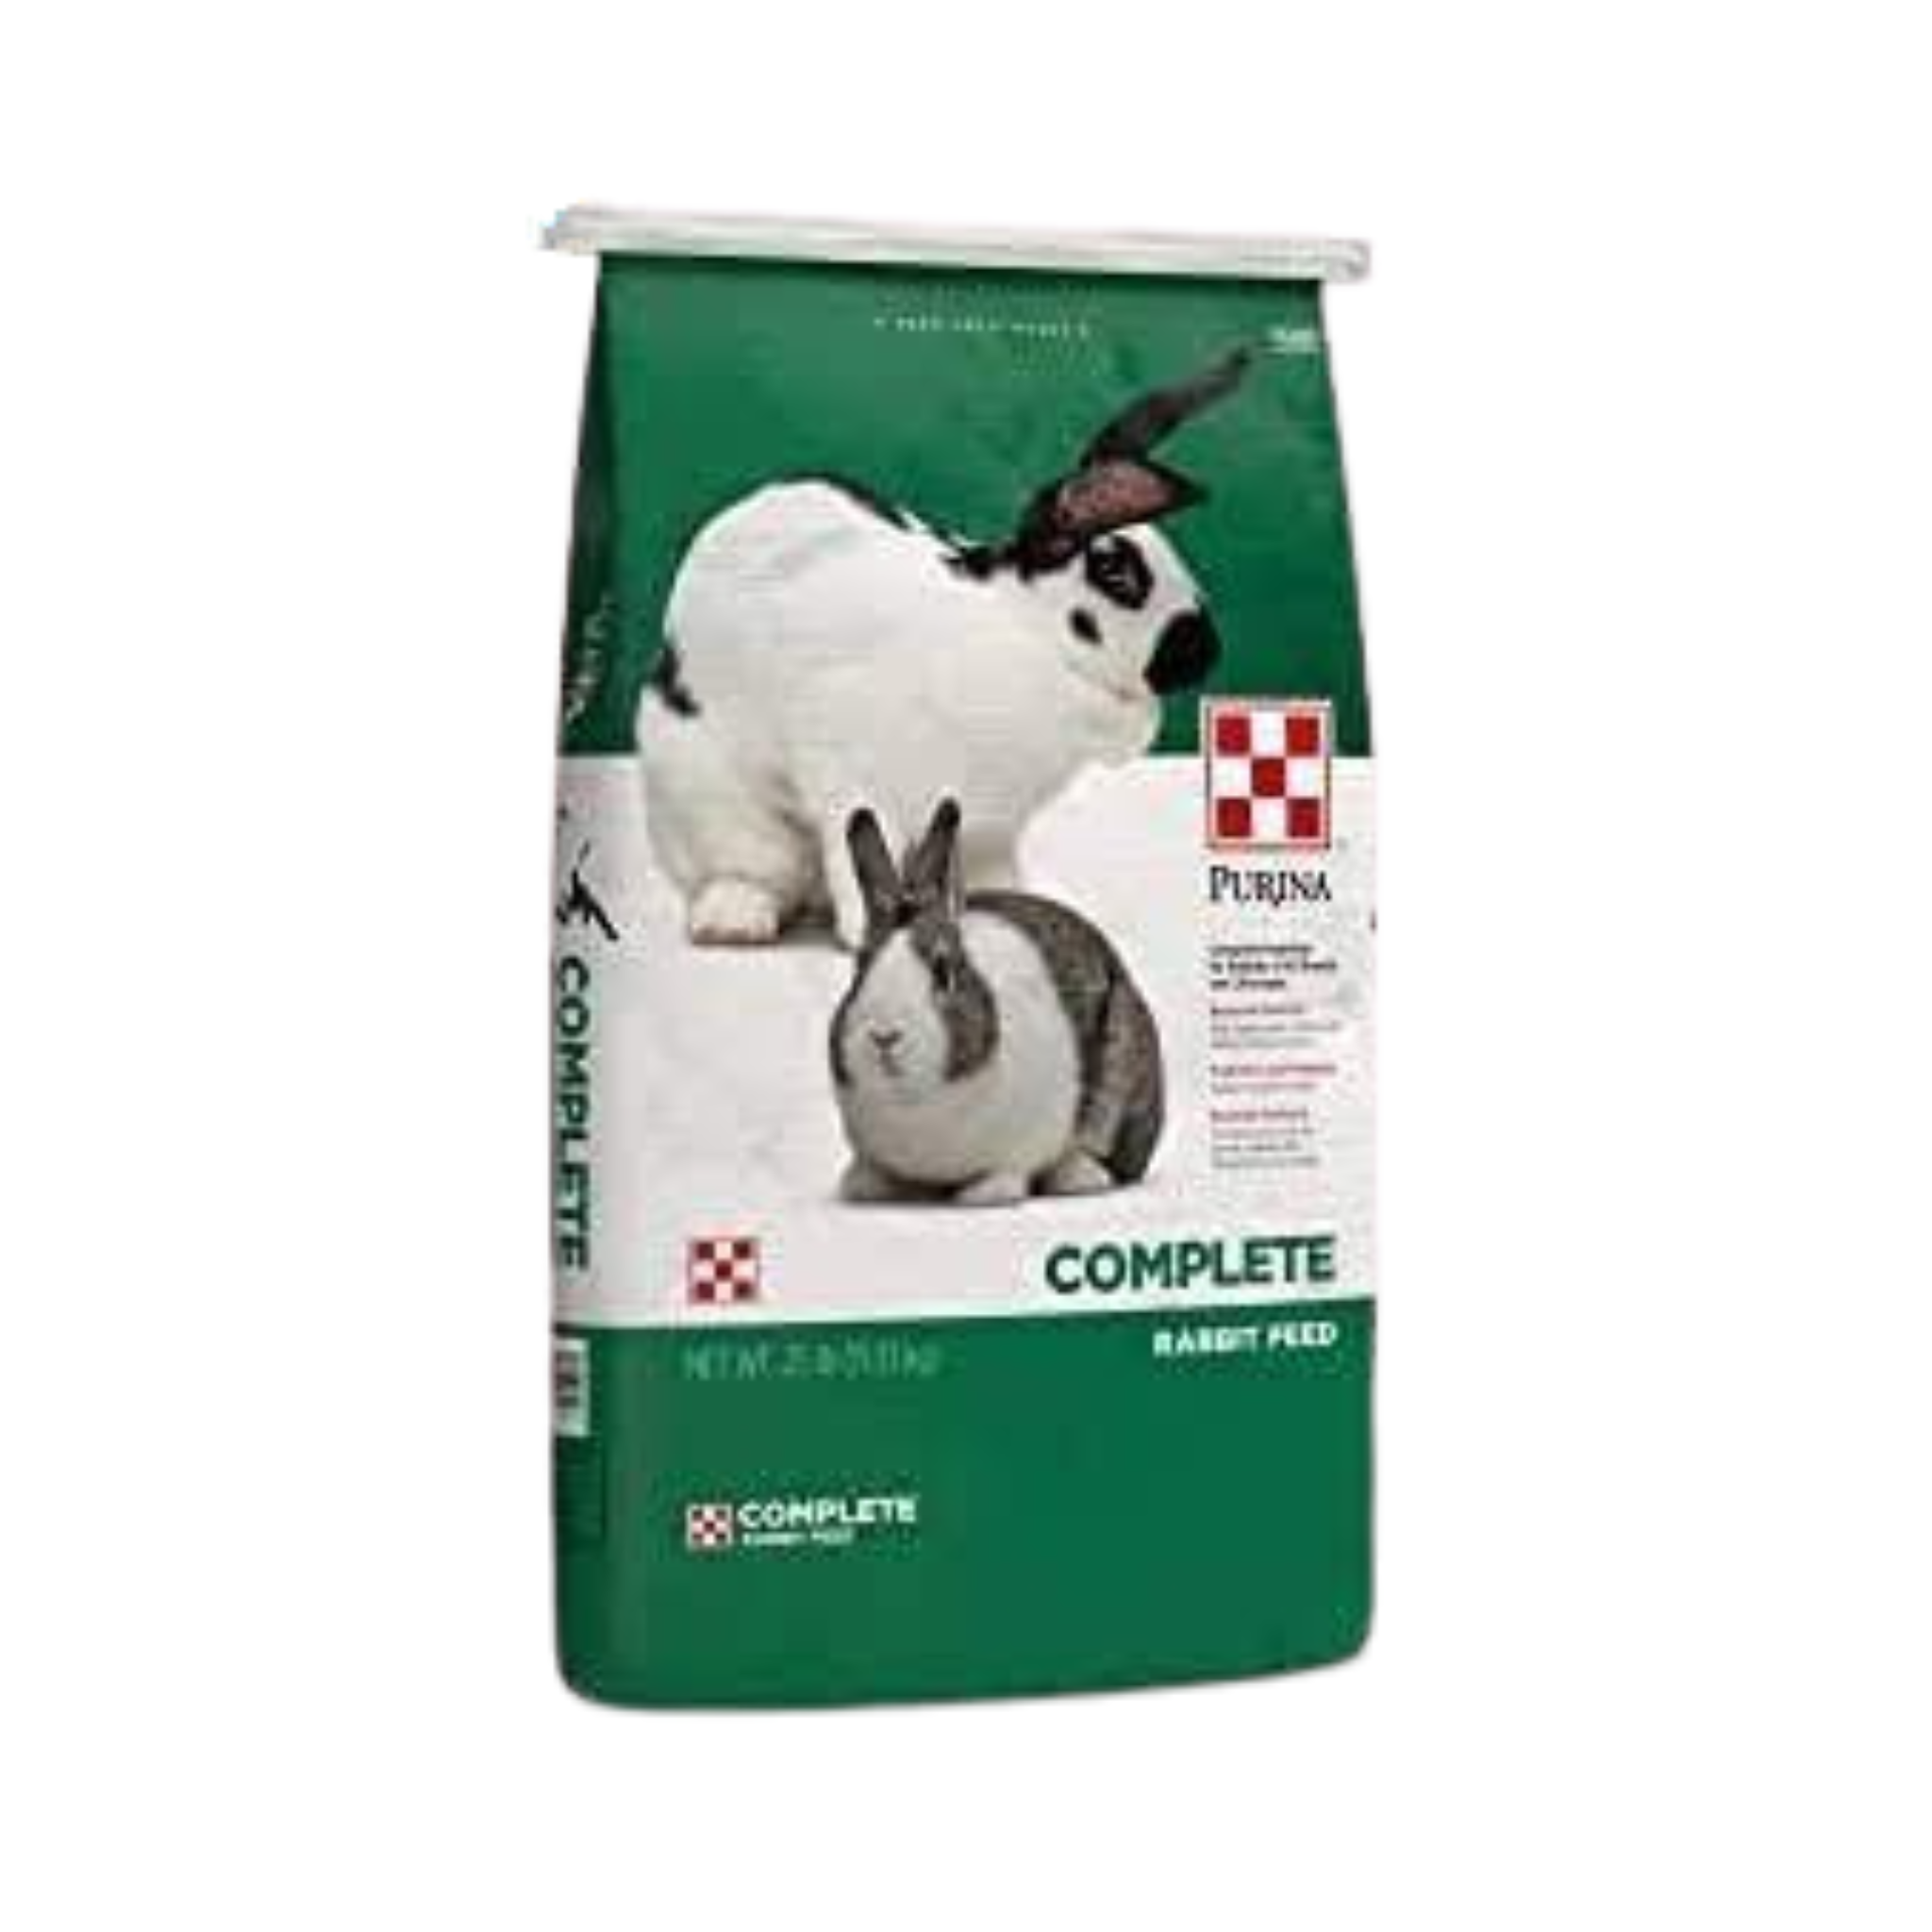 Purina Complete Rabbit Feed